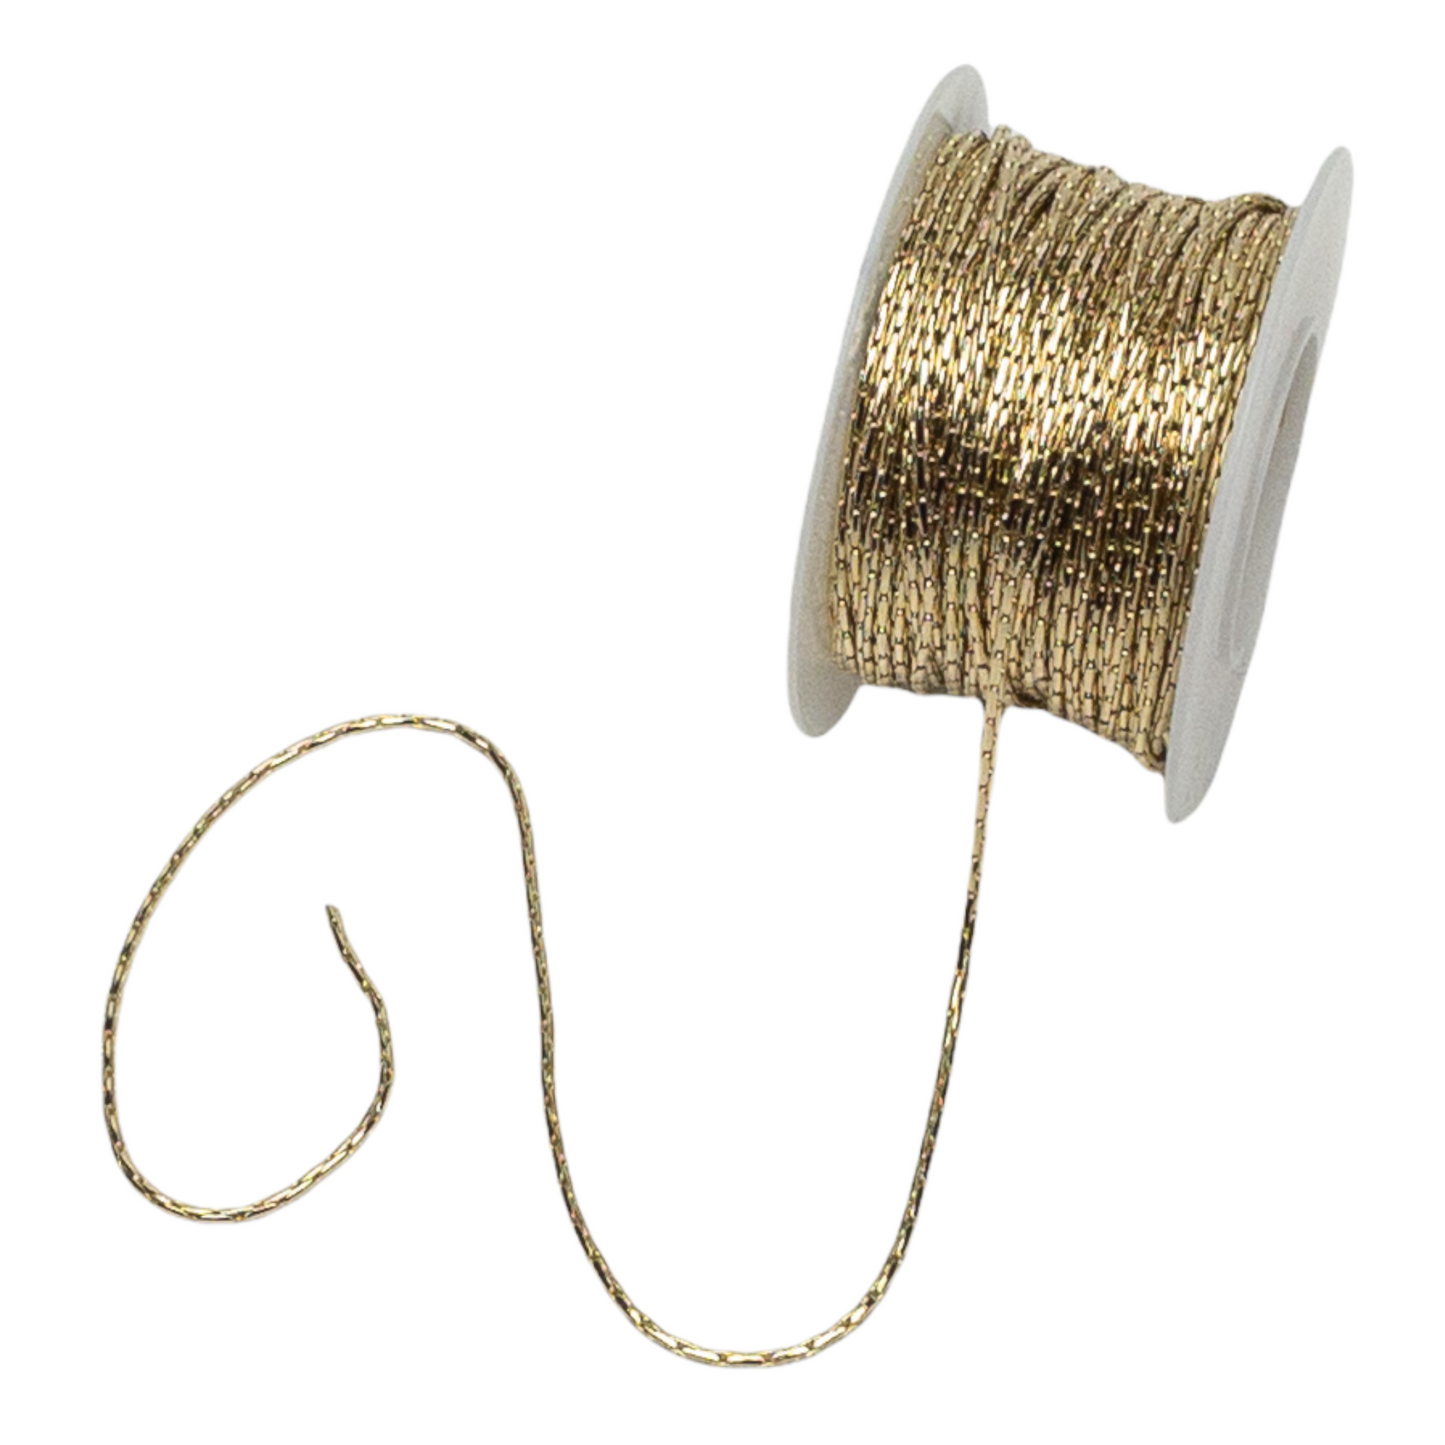 Slinky Beading 1.25mm Chain (11 Colors Available) - 1 ft.